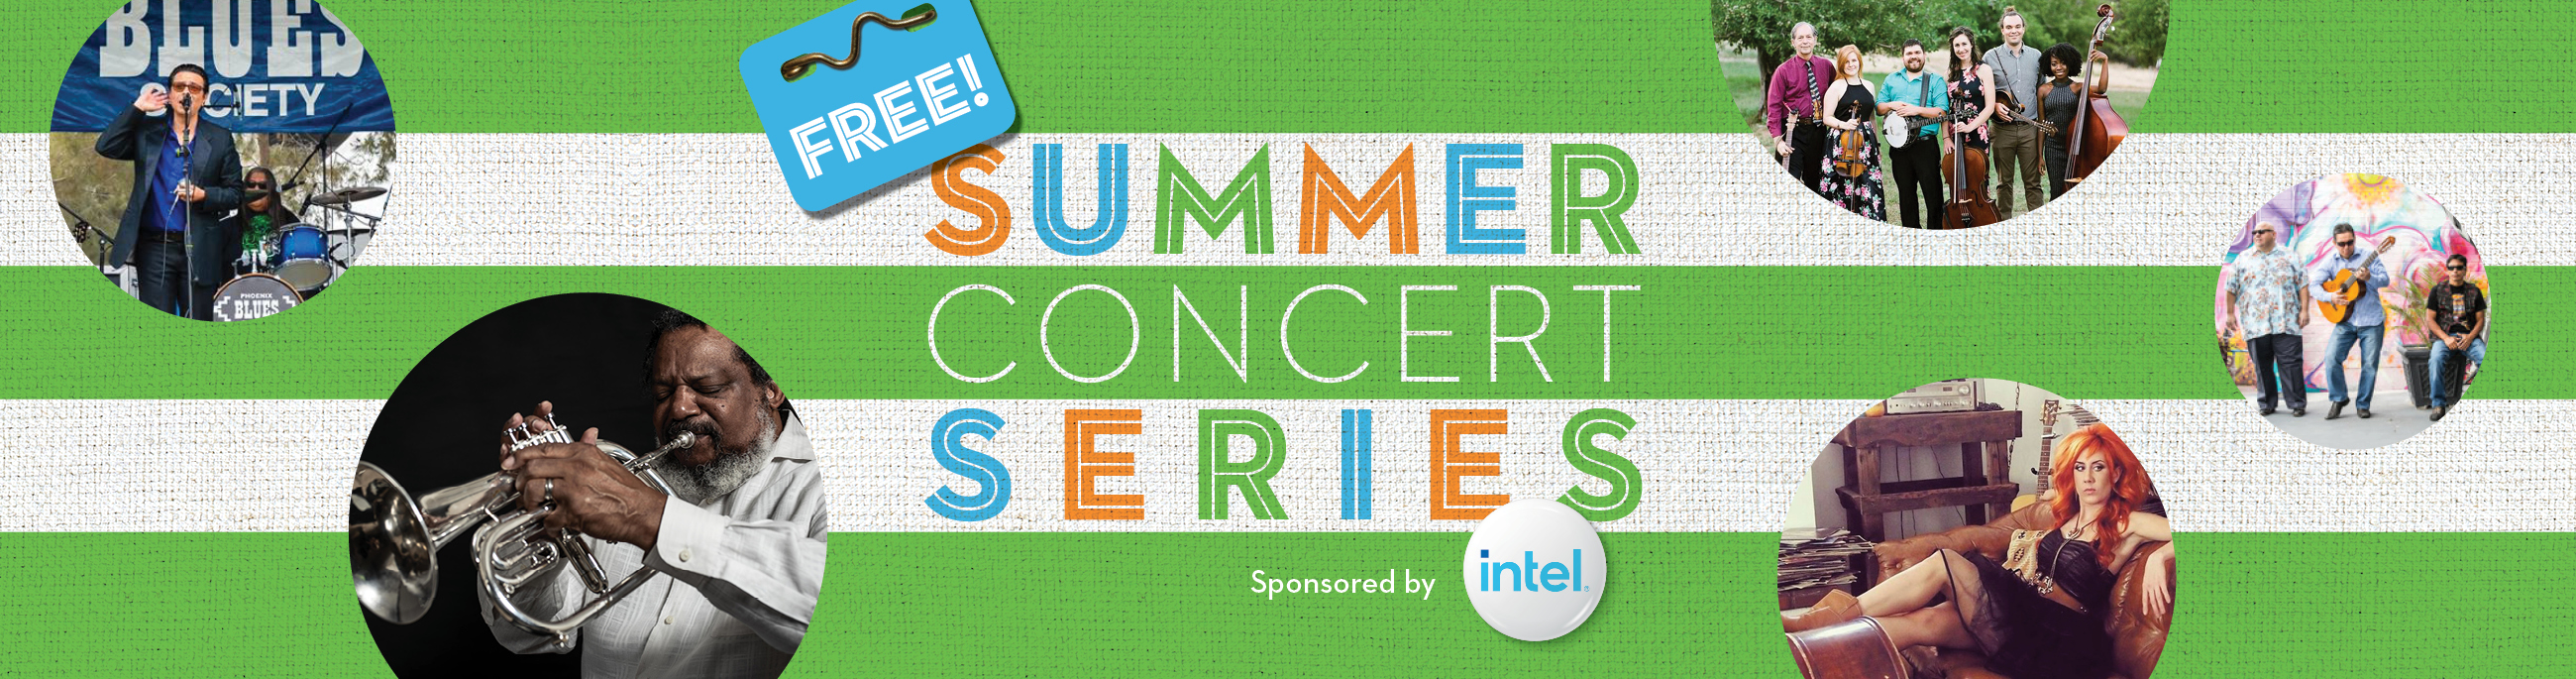 Hotter temperatures mean its times for the CCA Summer Concert Series